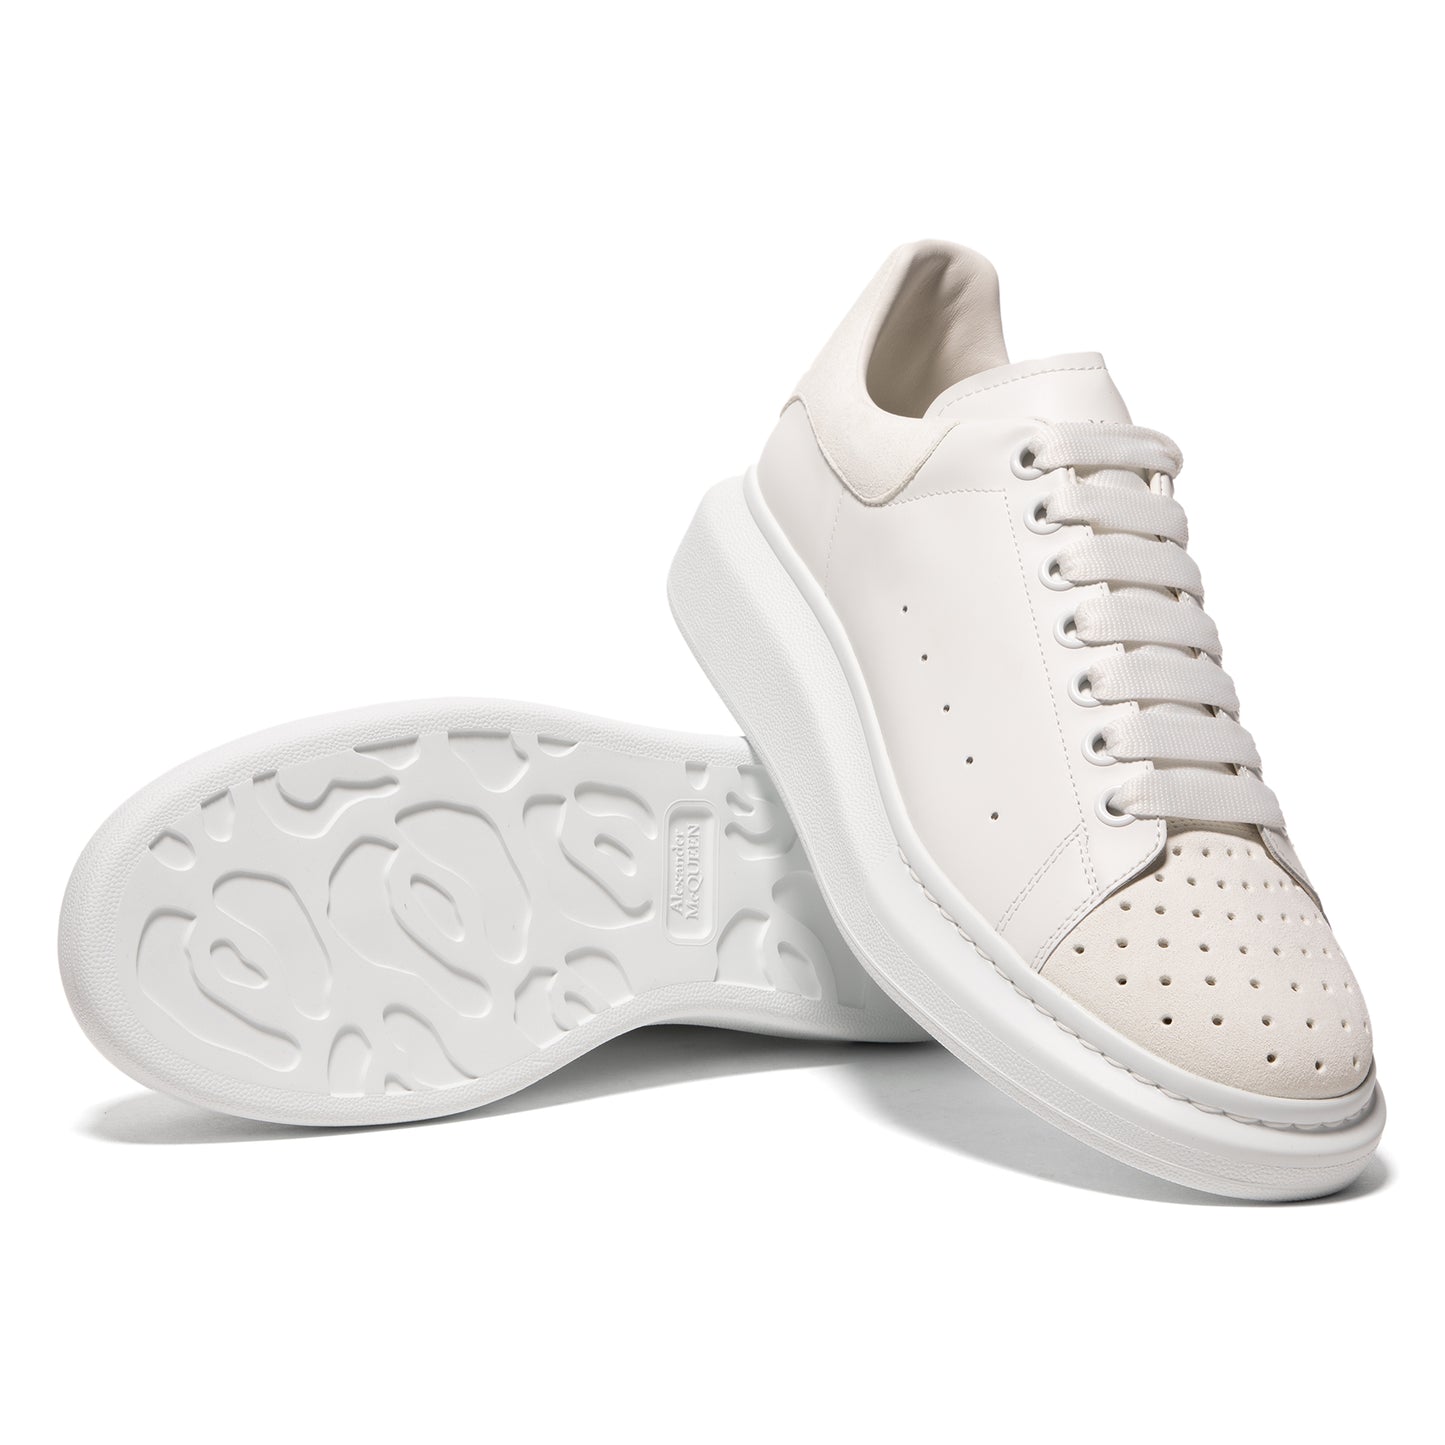 Alexander McQueen, Perforated Oversized sneaker (White)